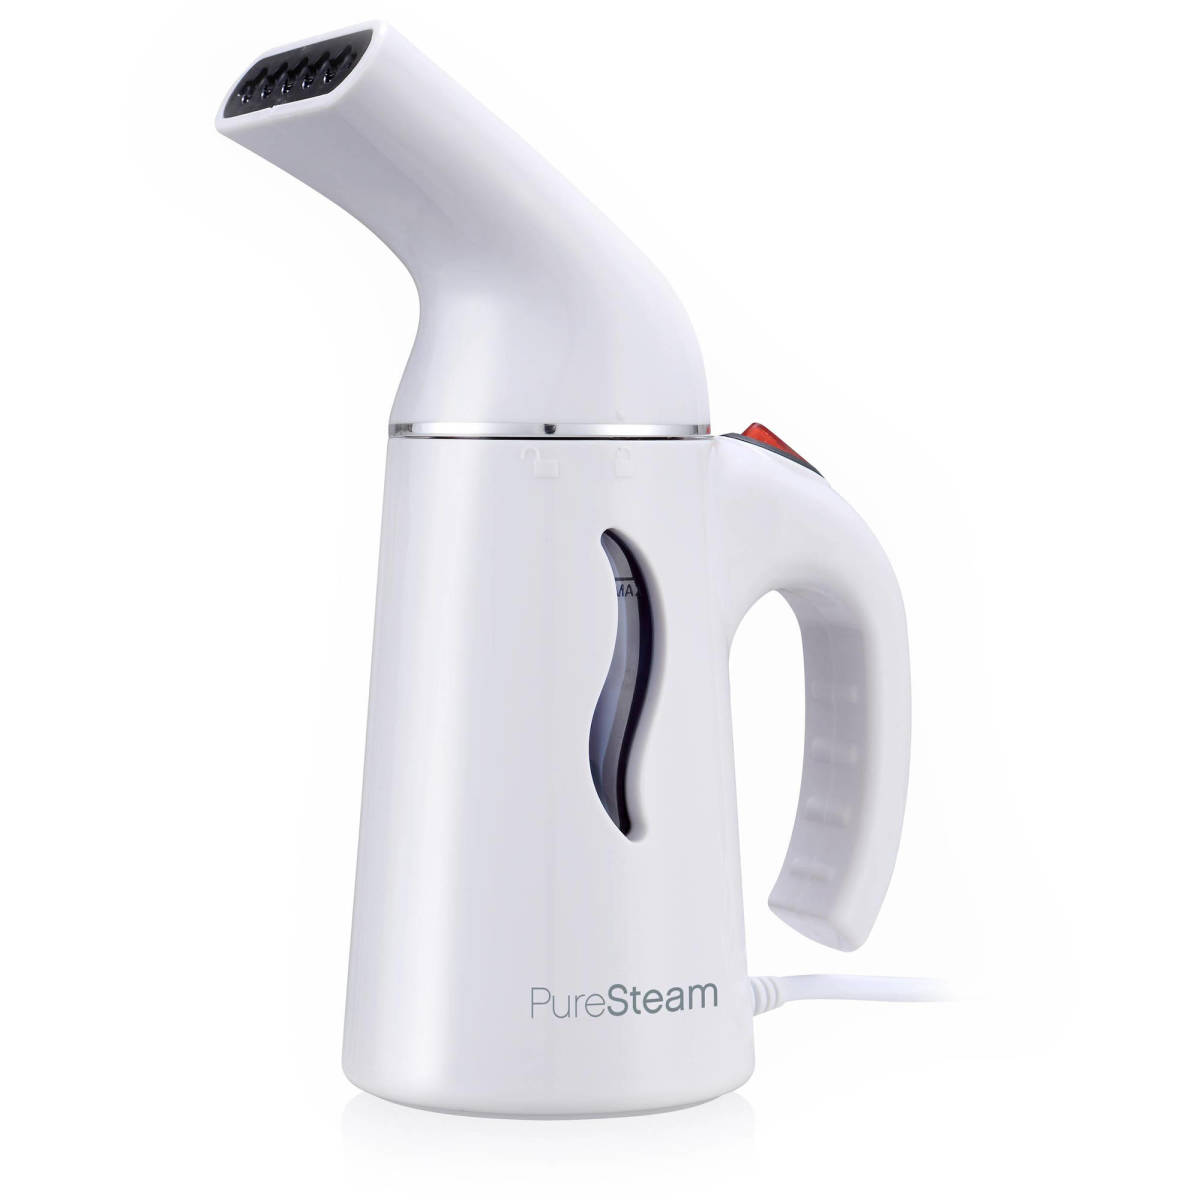 PureSteam fabric steamer, $29.99, available at Amazon